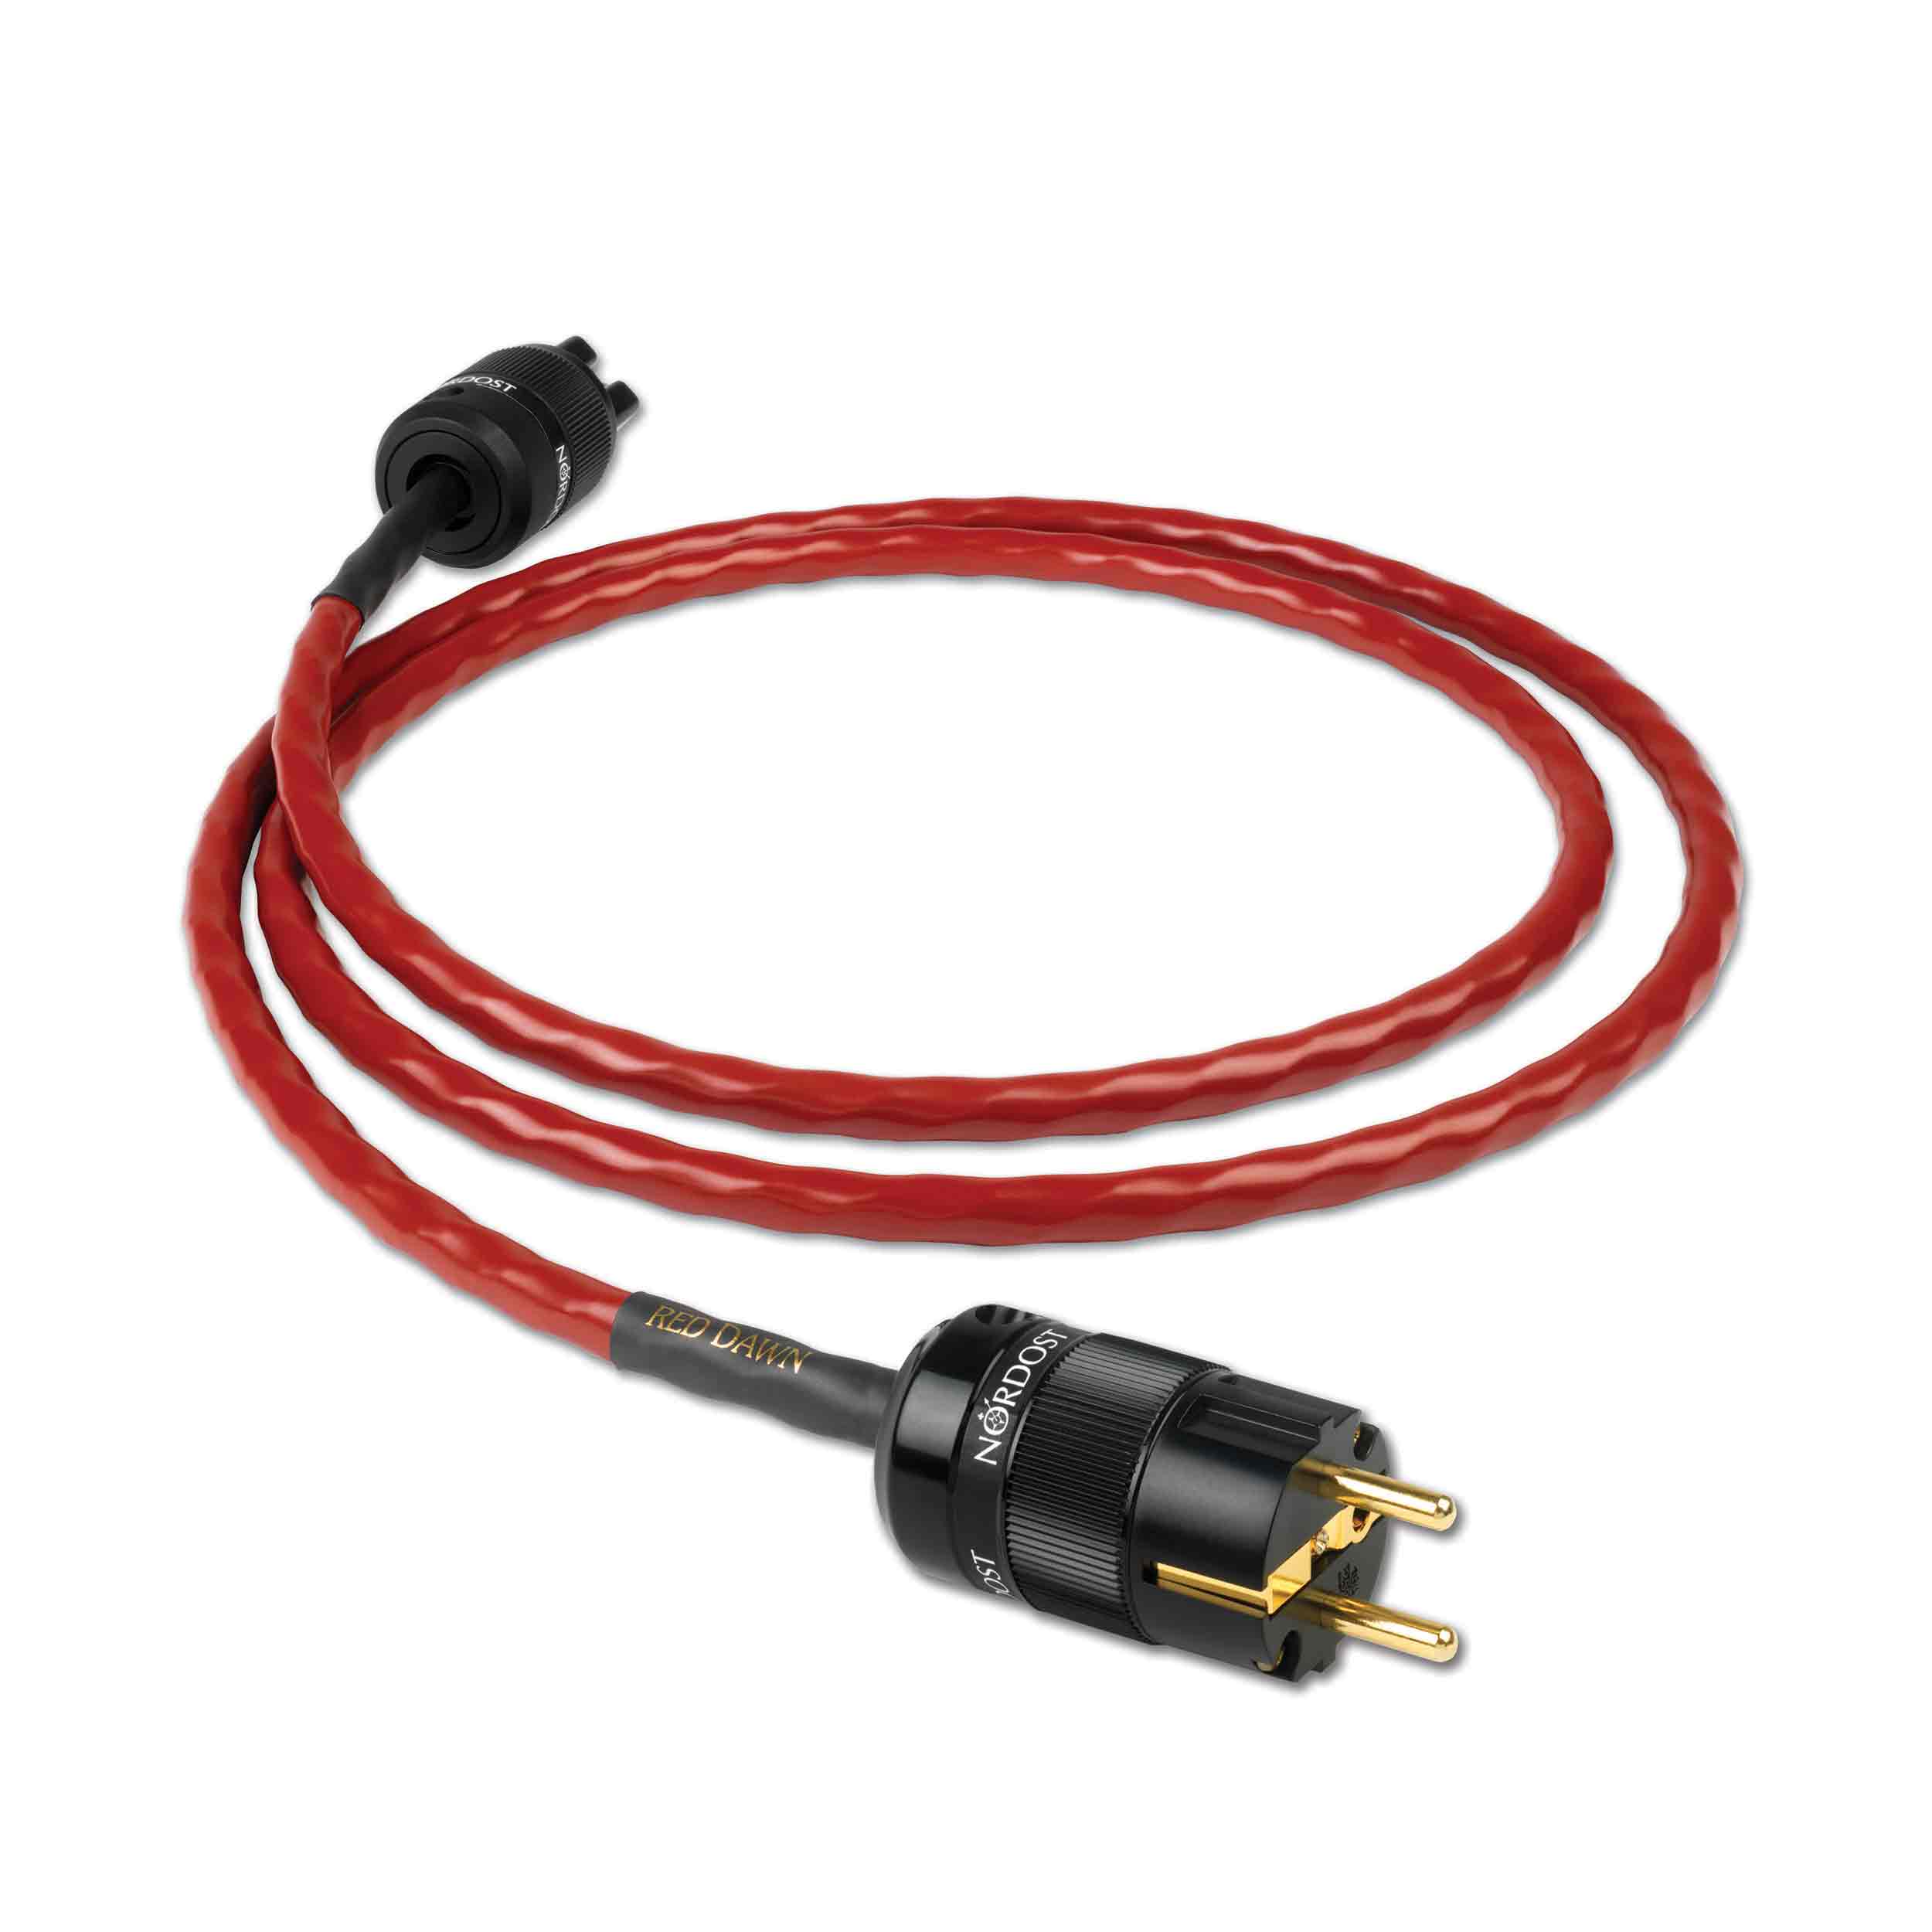 Red Dawn Power Cord